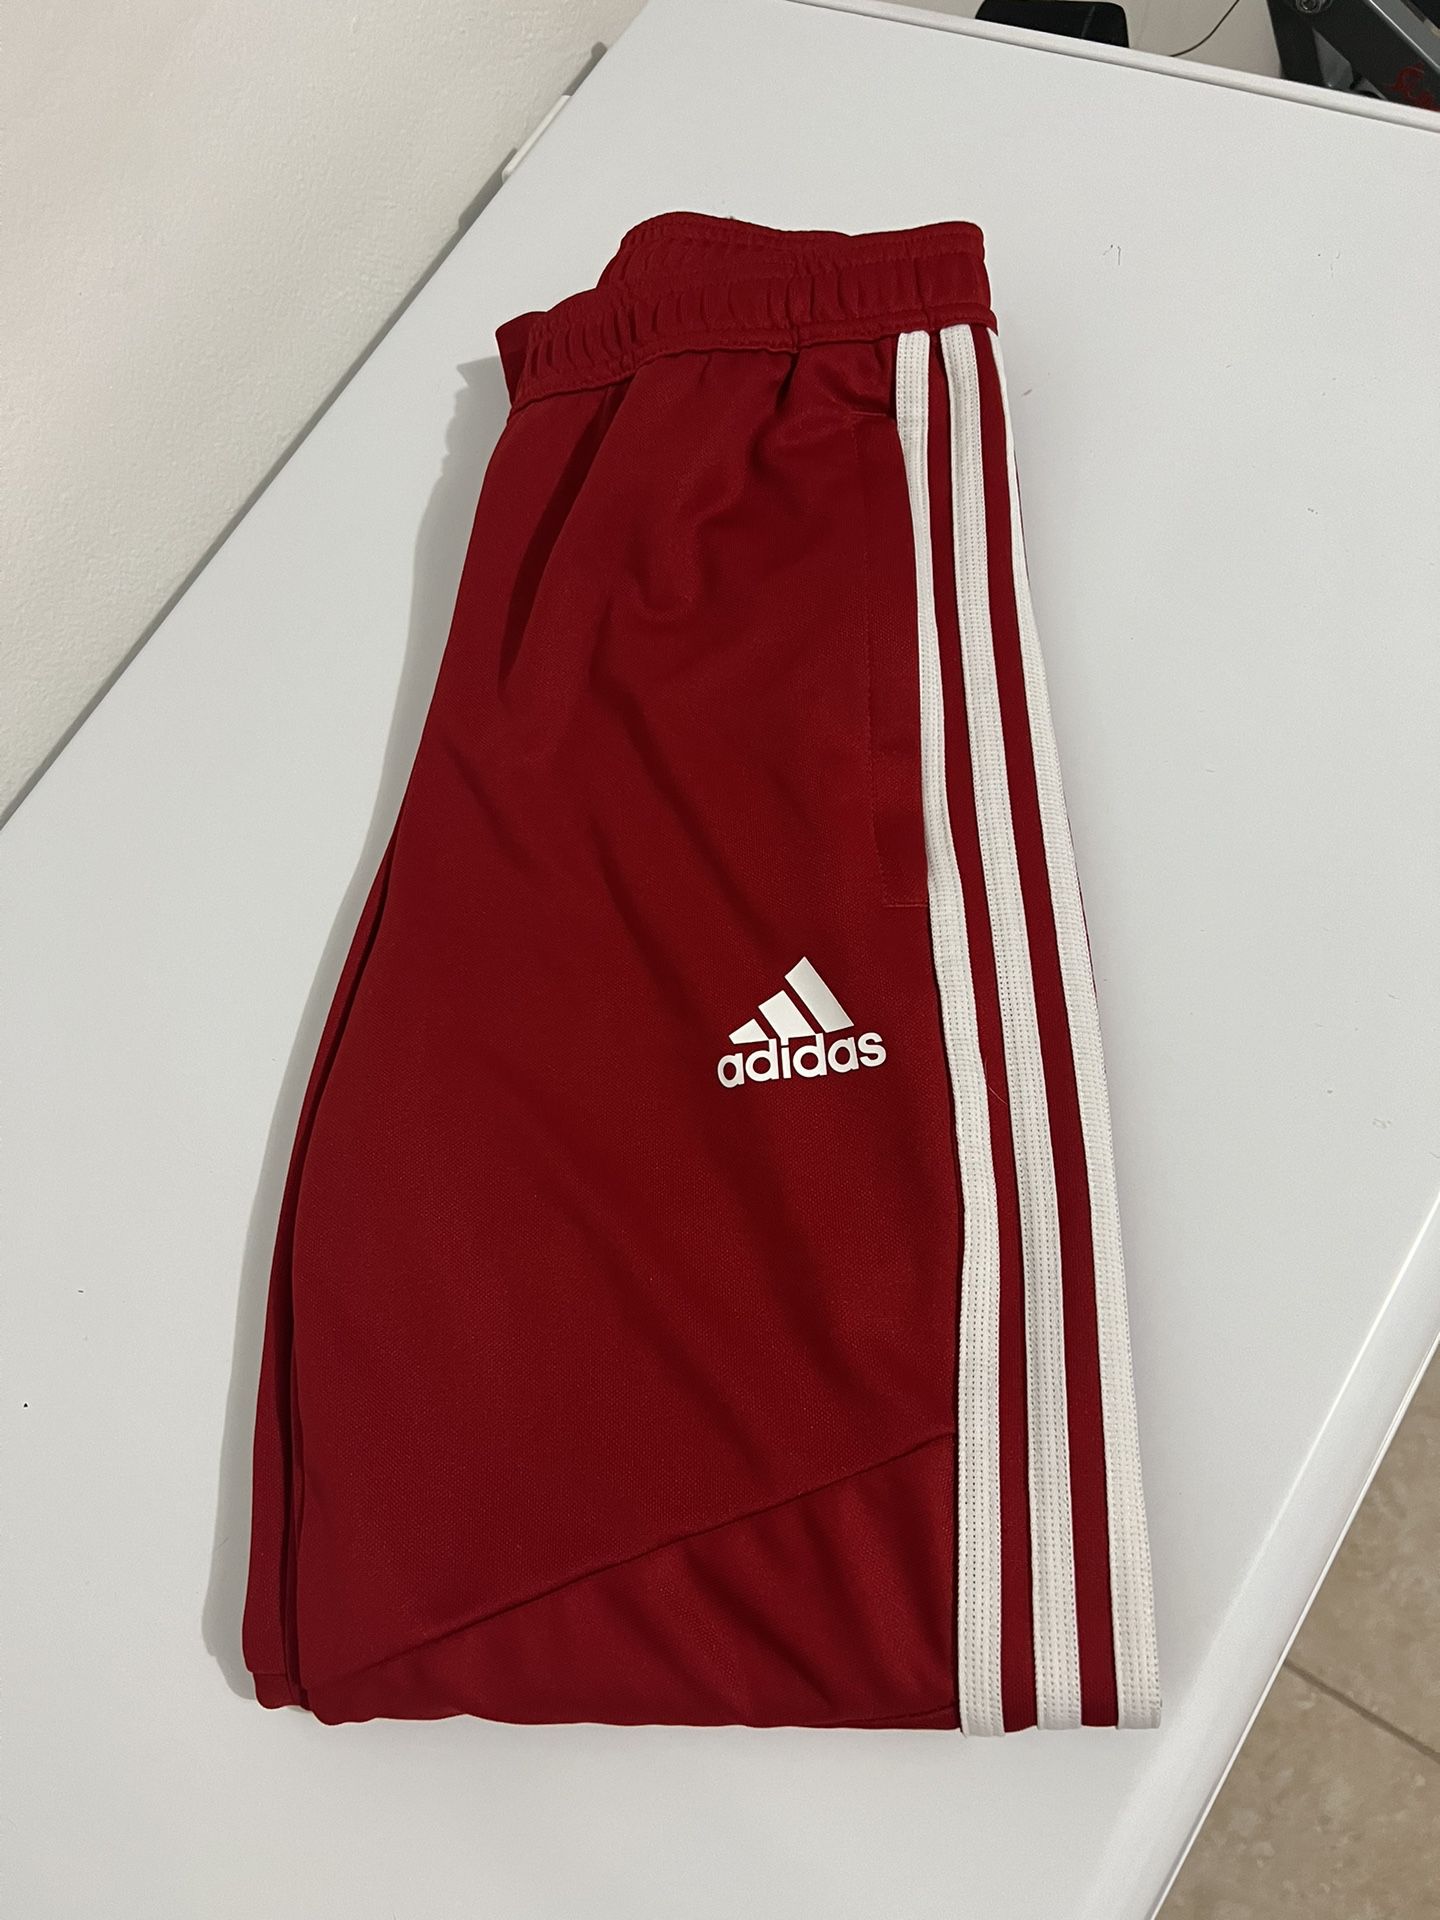 Small Size Adida Pants In Excellent Condition Like New $25 